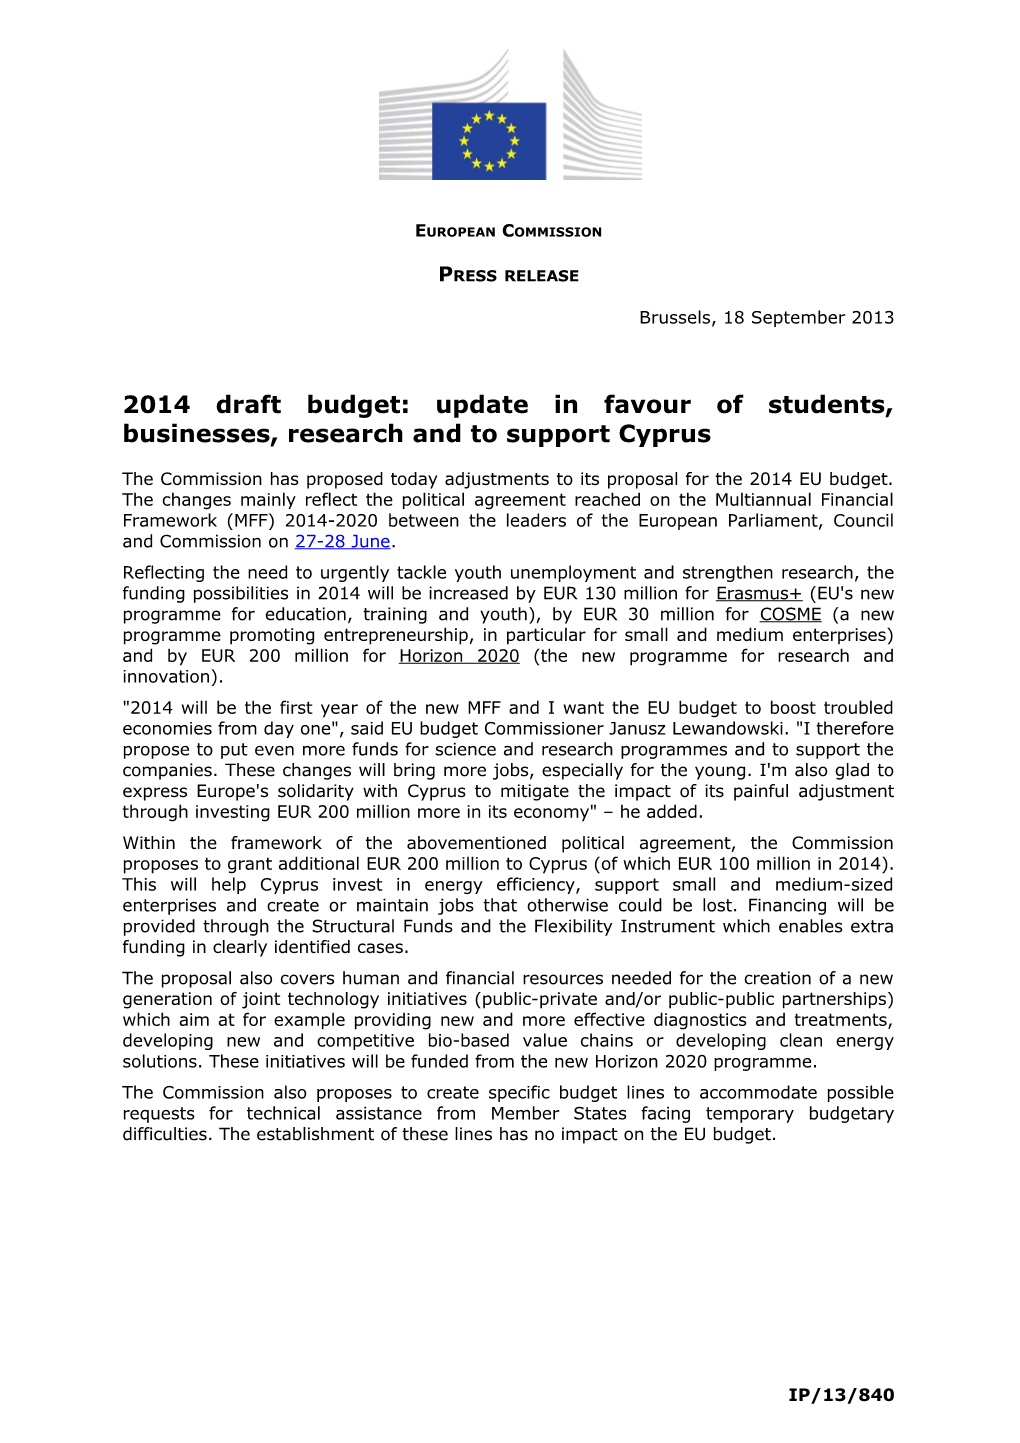 2014 Draft Budget: Update in Favour of Students, Businesses, Research and to Support Cyprus